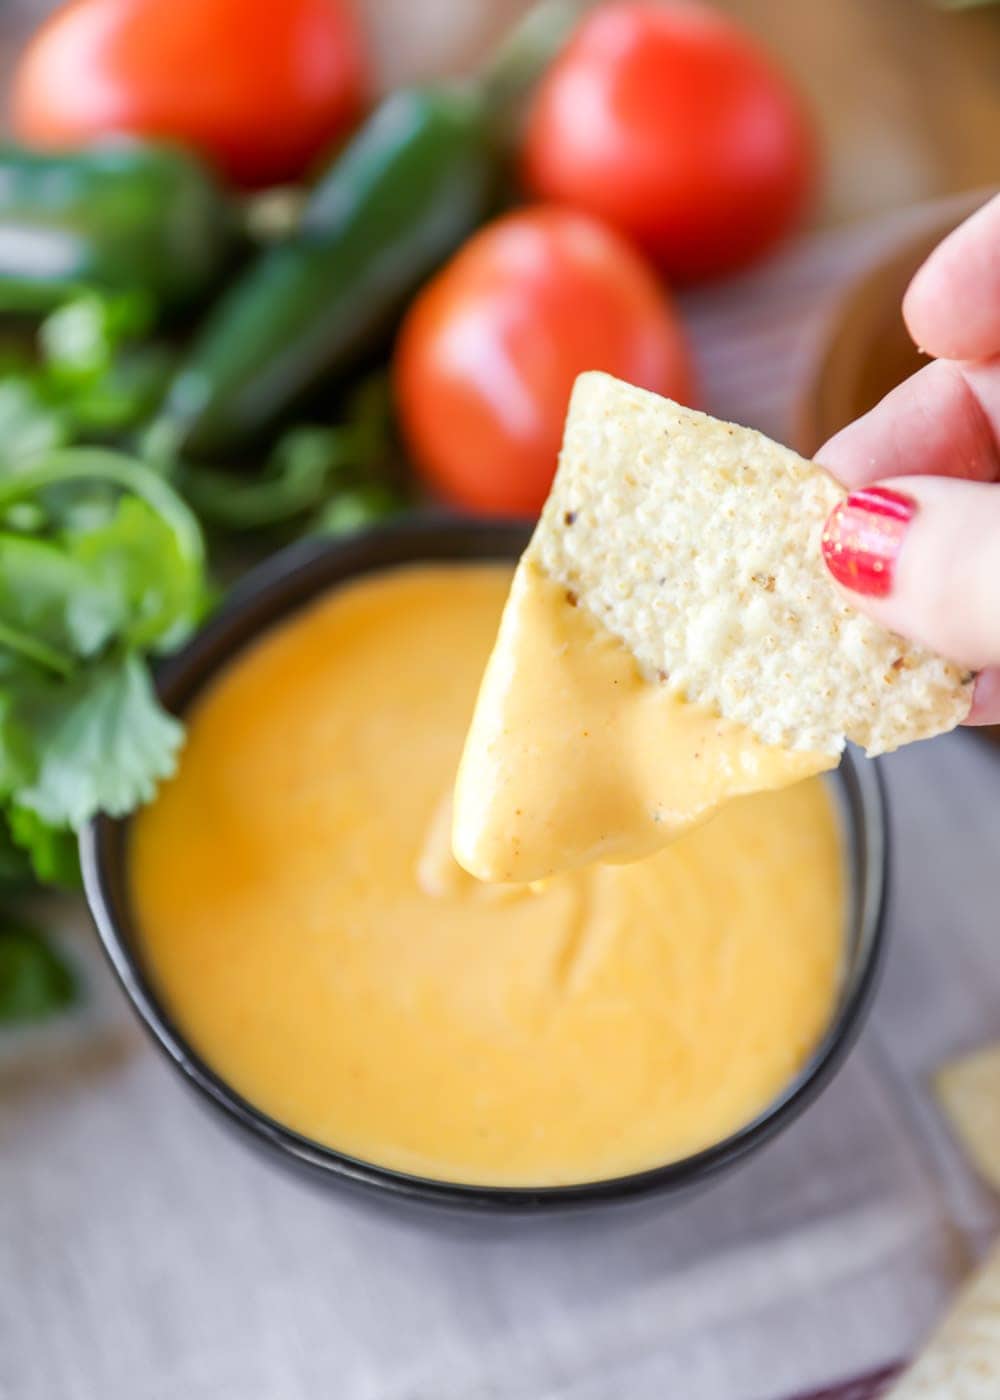 Chip being dipped into nacho cheese dip